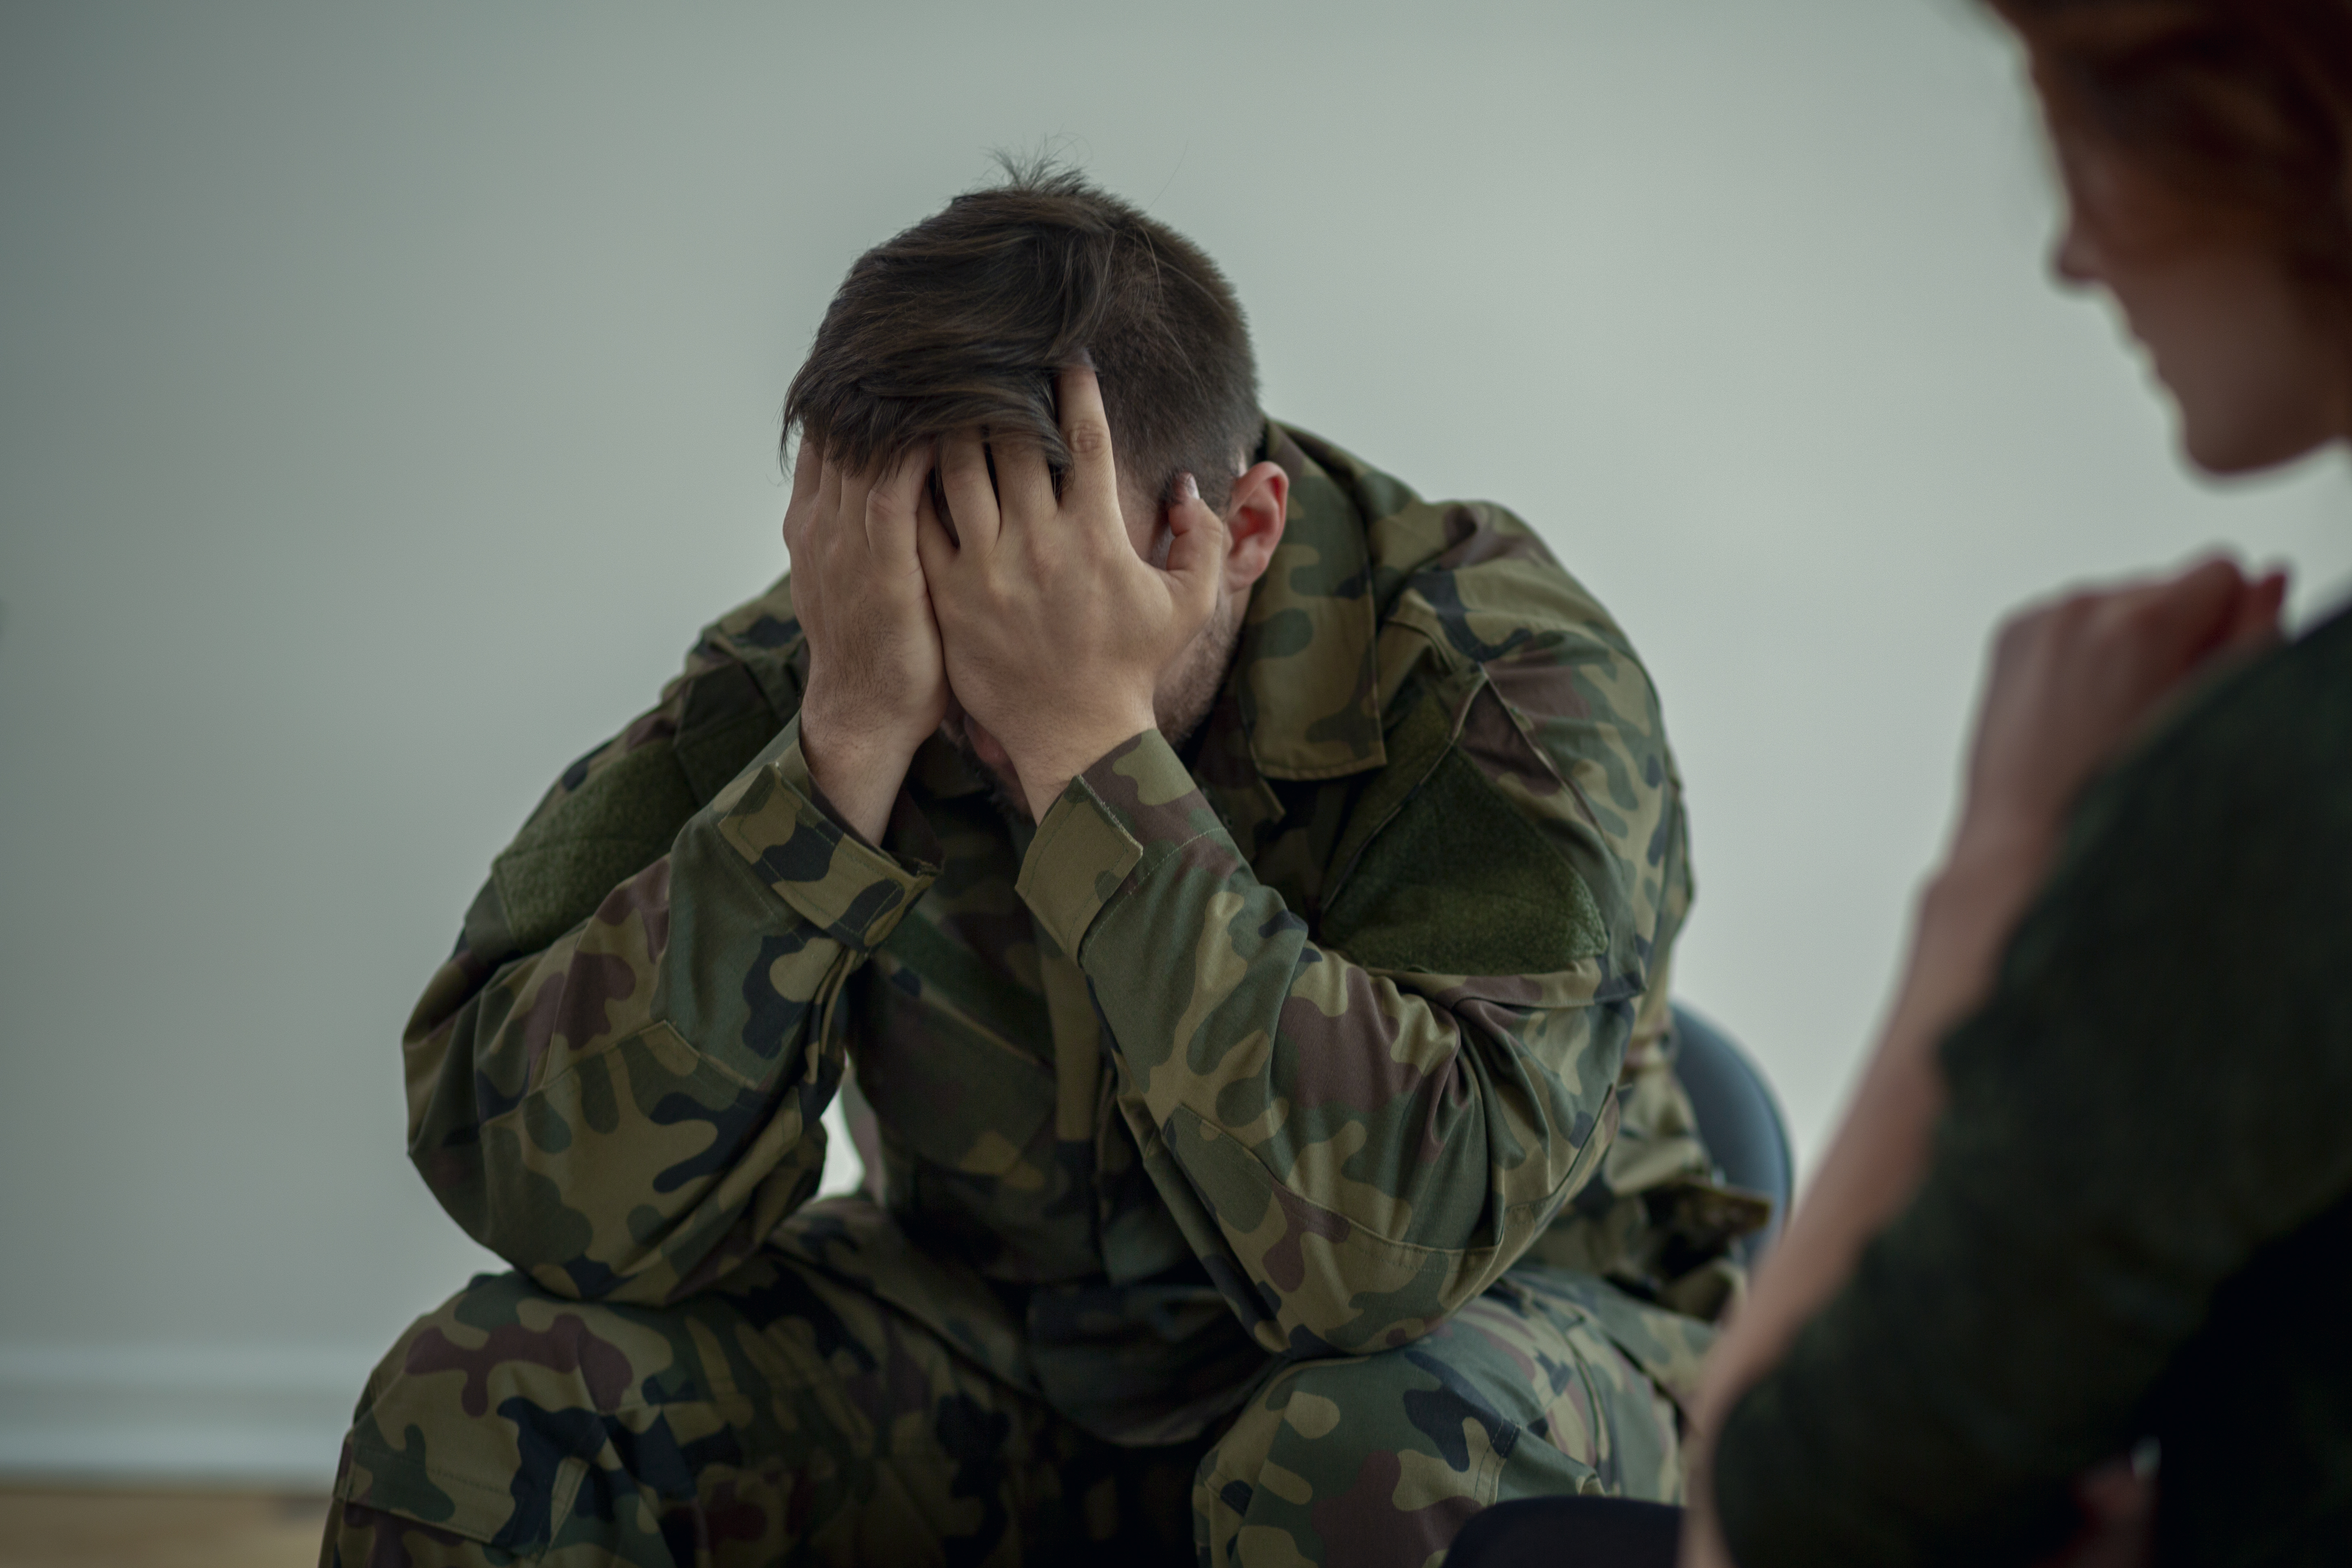 Veterans are at higher risk of depression and suicide, studies show